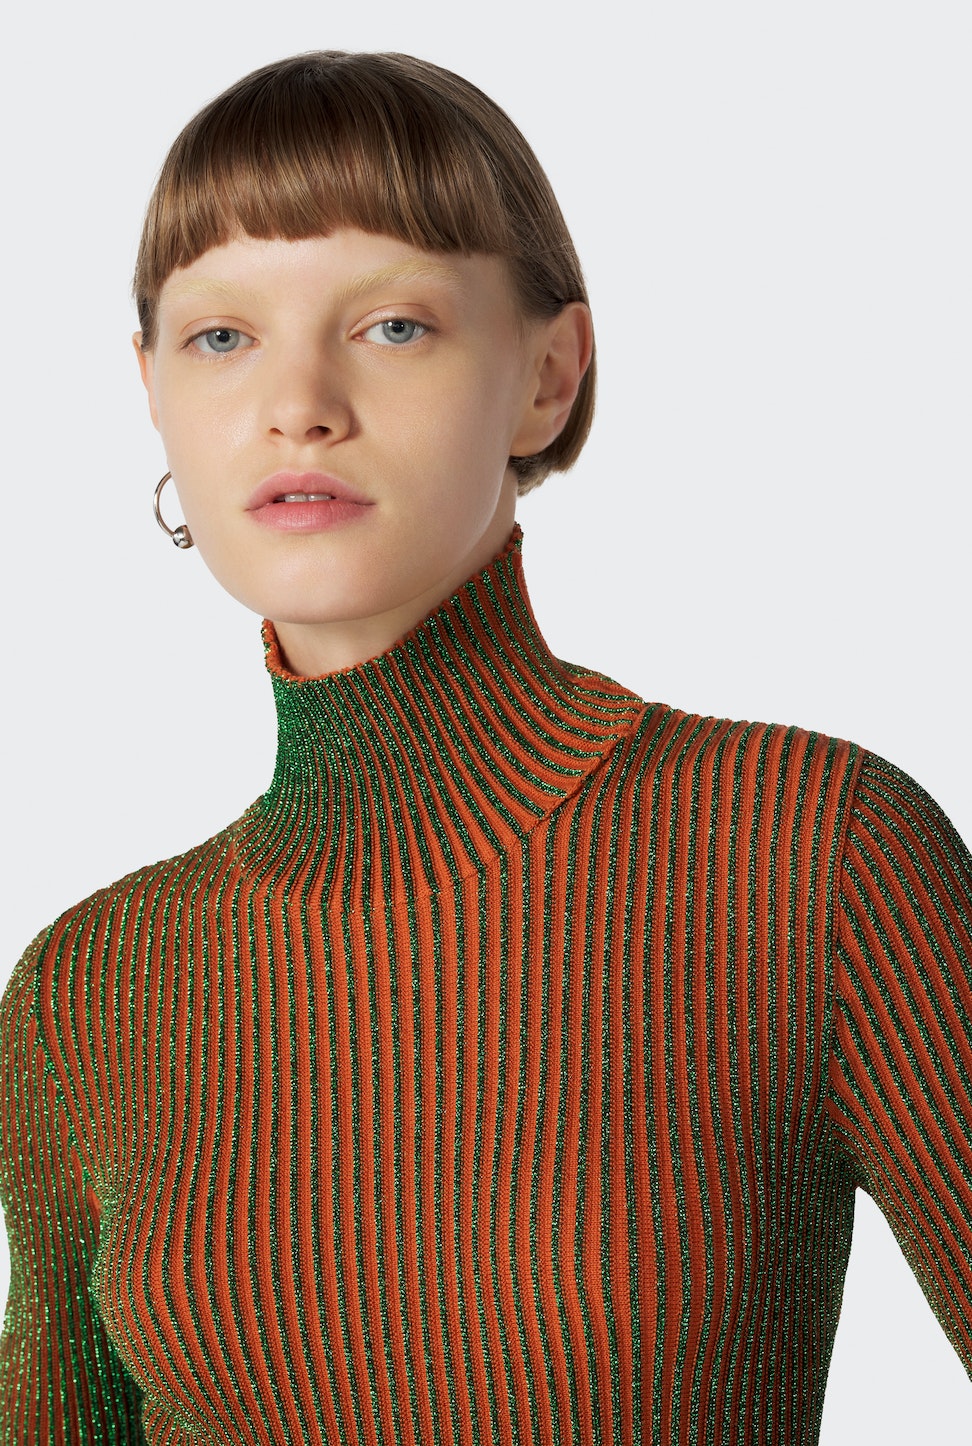 The Cyber Knit Top